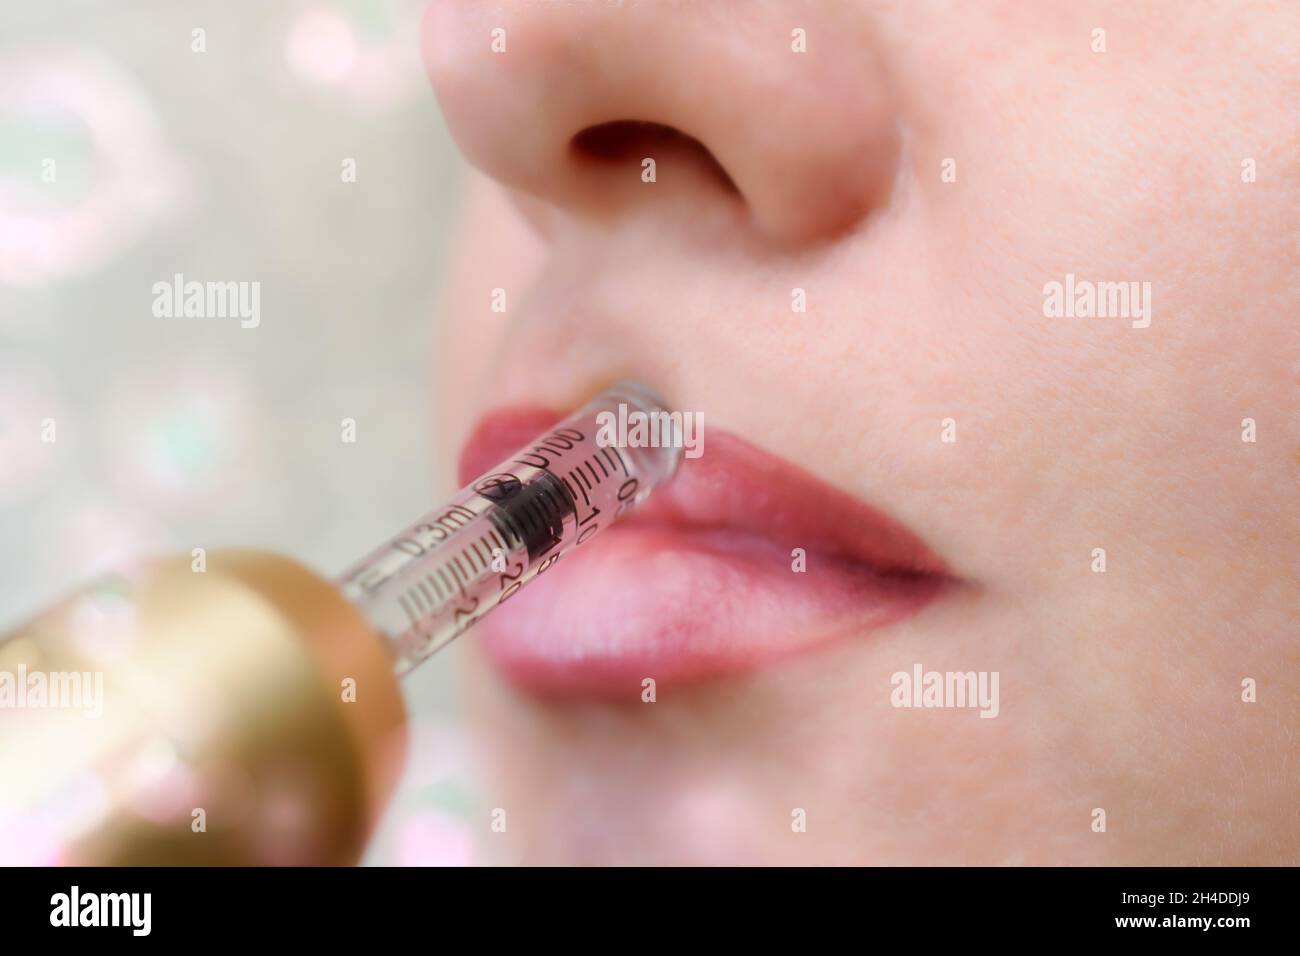 Lip augmentation treatment using needle-free mesotherapy with hyaluron pen device Stock Photo